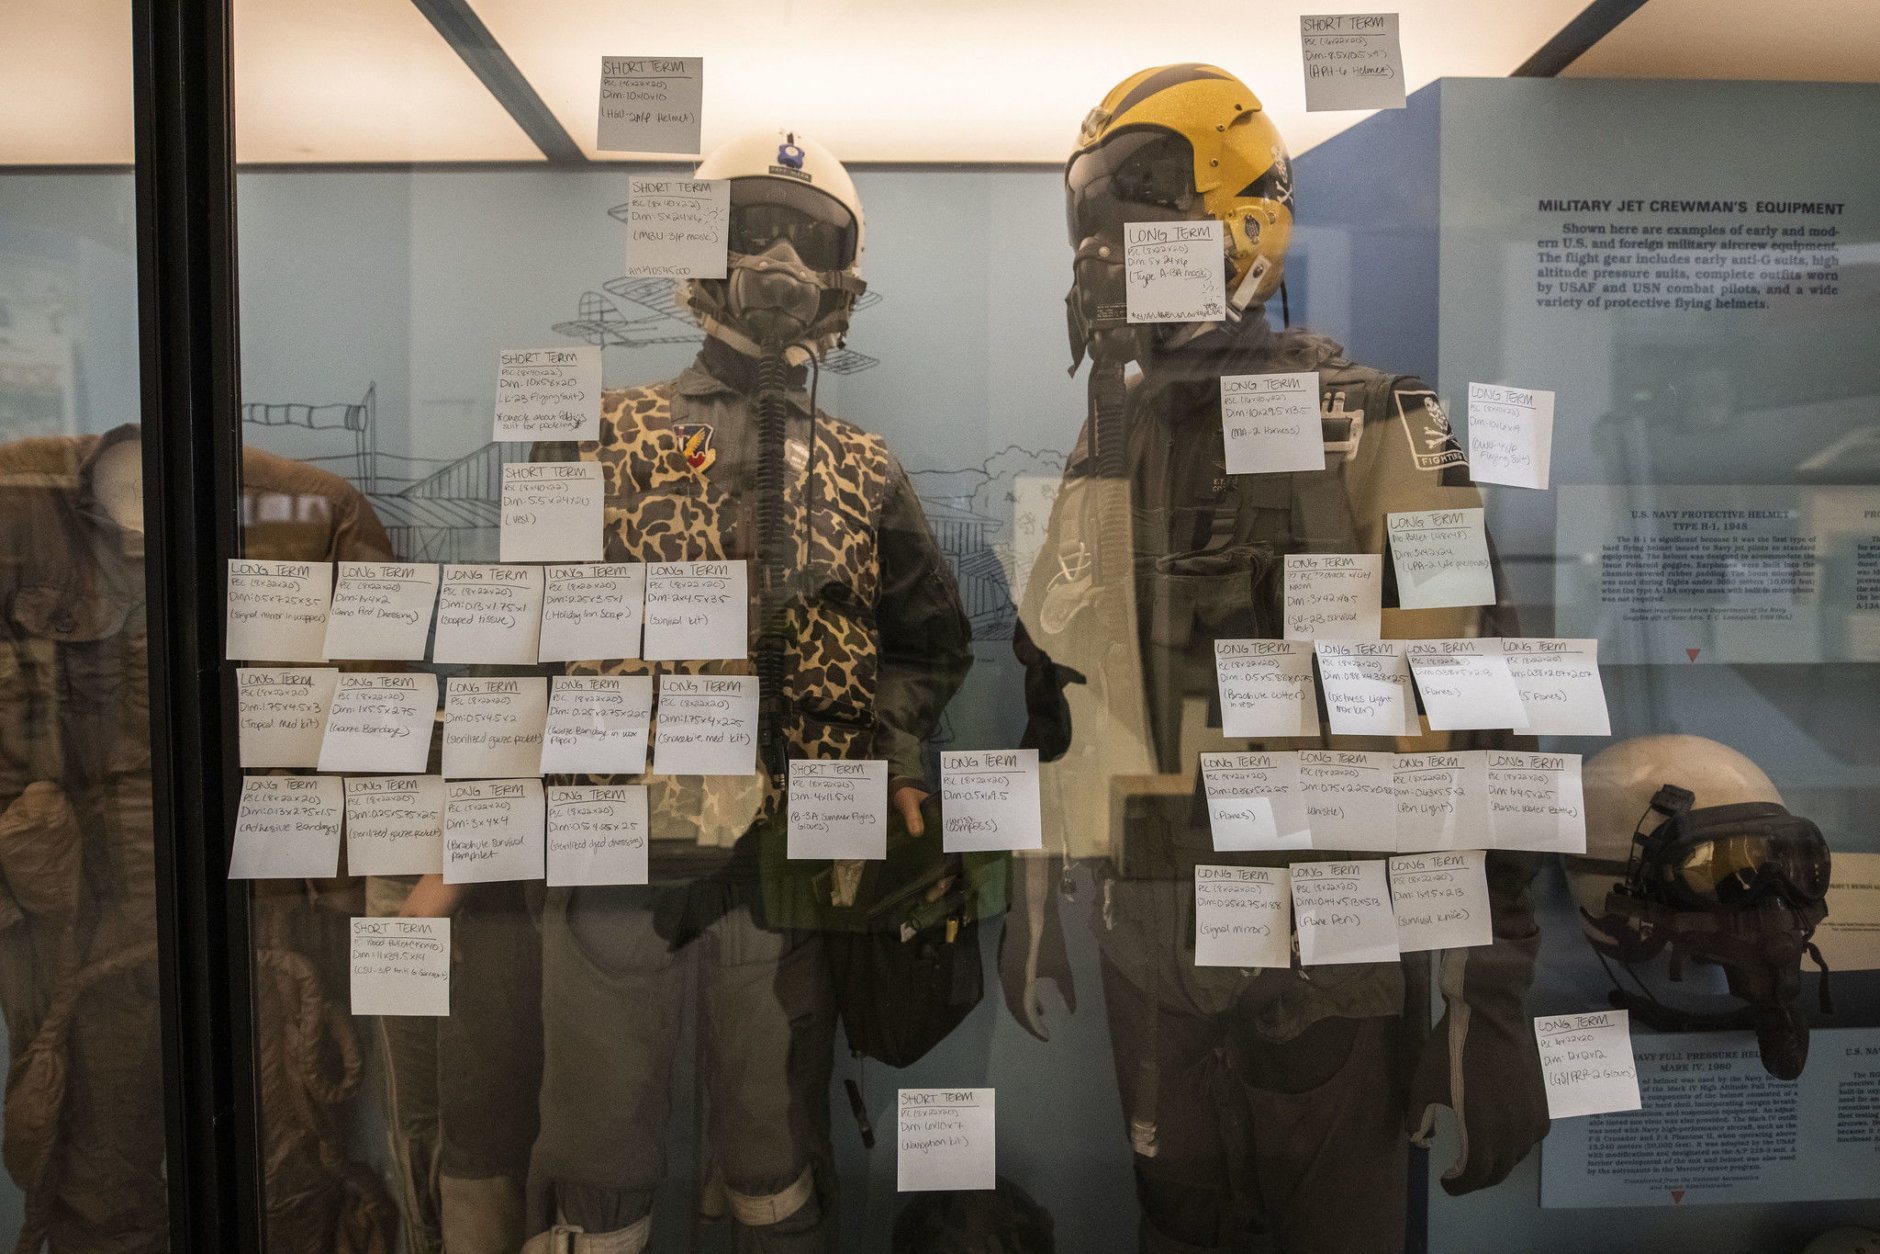 Items in display cases are labeled before being removed and carefully packed in the closed Jet Aviation gallery of the Smithsonian Air and Space museum in Washington, DC, February 12, 2019. (Smithsonian  photo by Jim Preston)  Material is subject to Smithsonian Terms of Use. Should you wish to use National Air and Space material in any medium, please submit an Application for Permission to Reproduce NASM Material, available at:  https://airandspace.si.edu/permissions